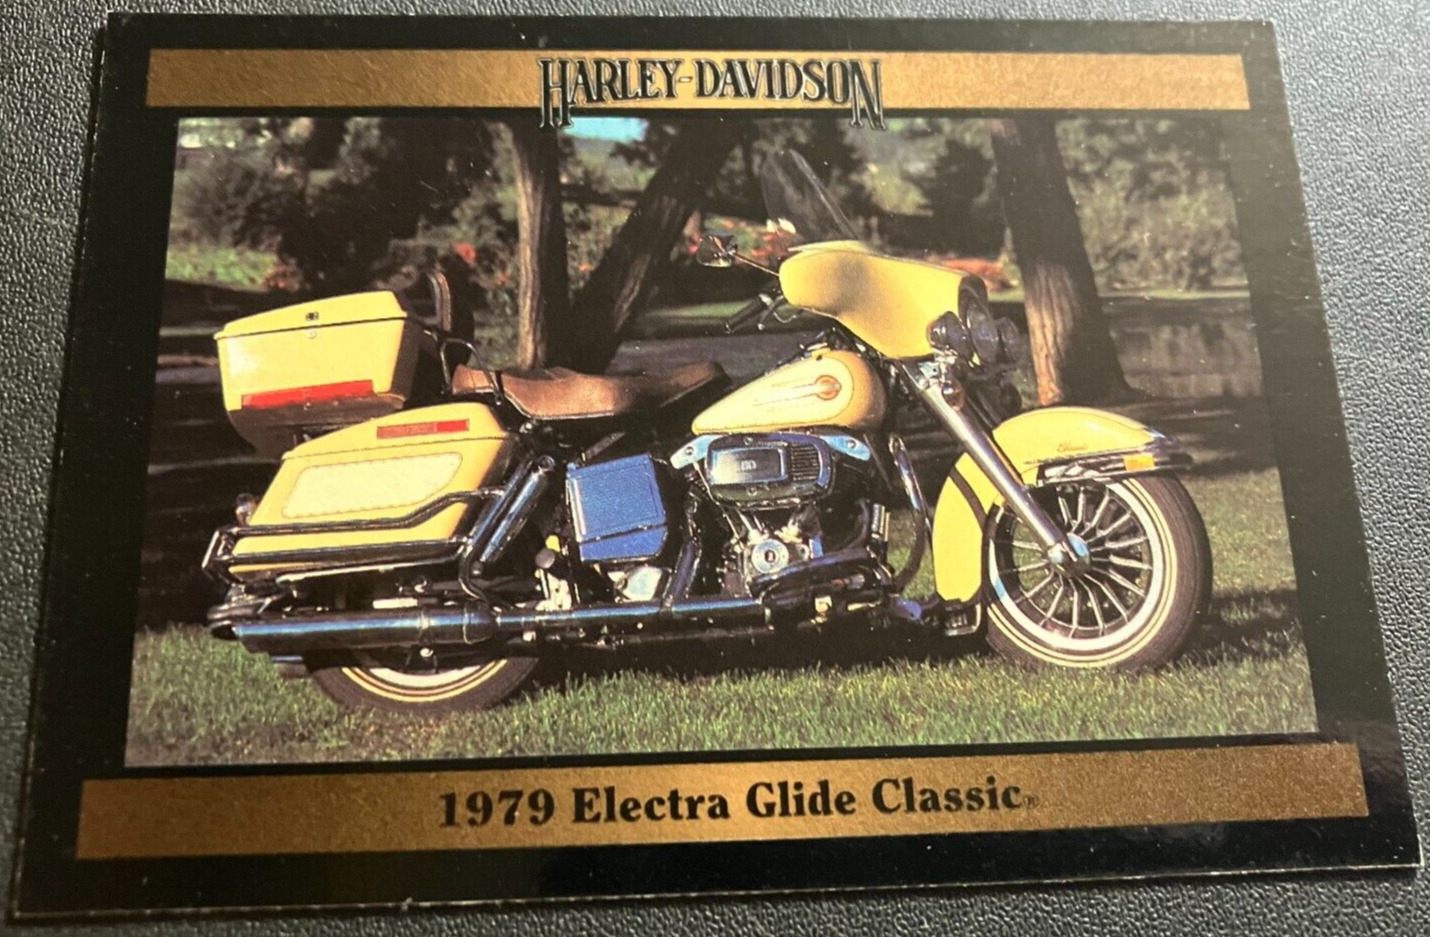 #168 1979 FLH Electra Glide Classic - Harley-Davidson Series 2 Collector\'s Card